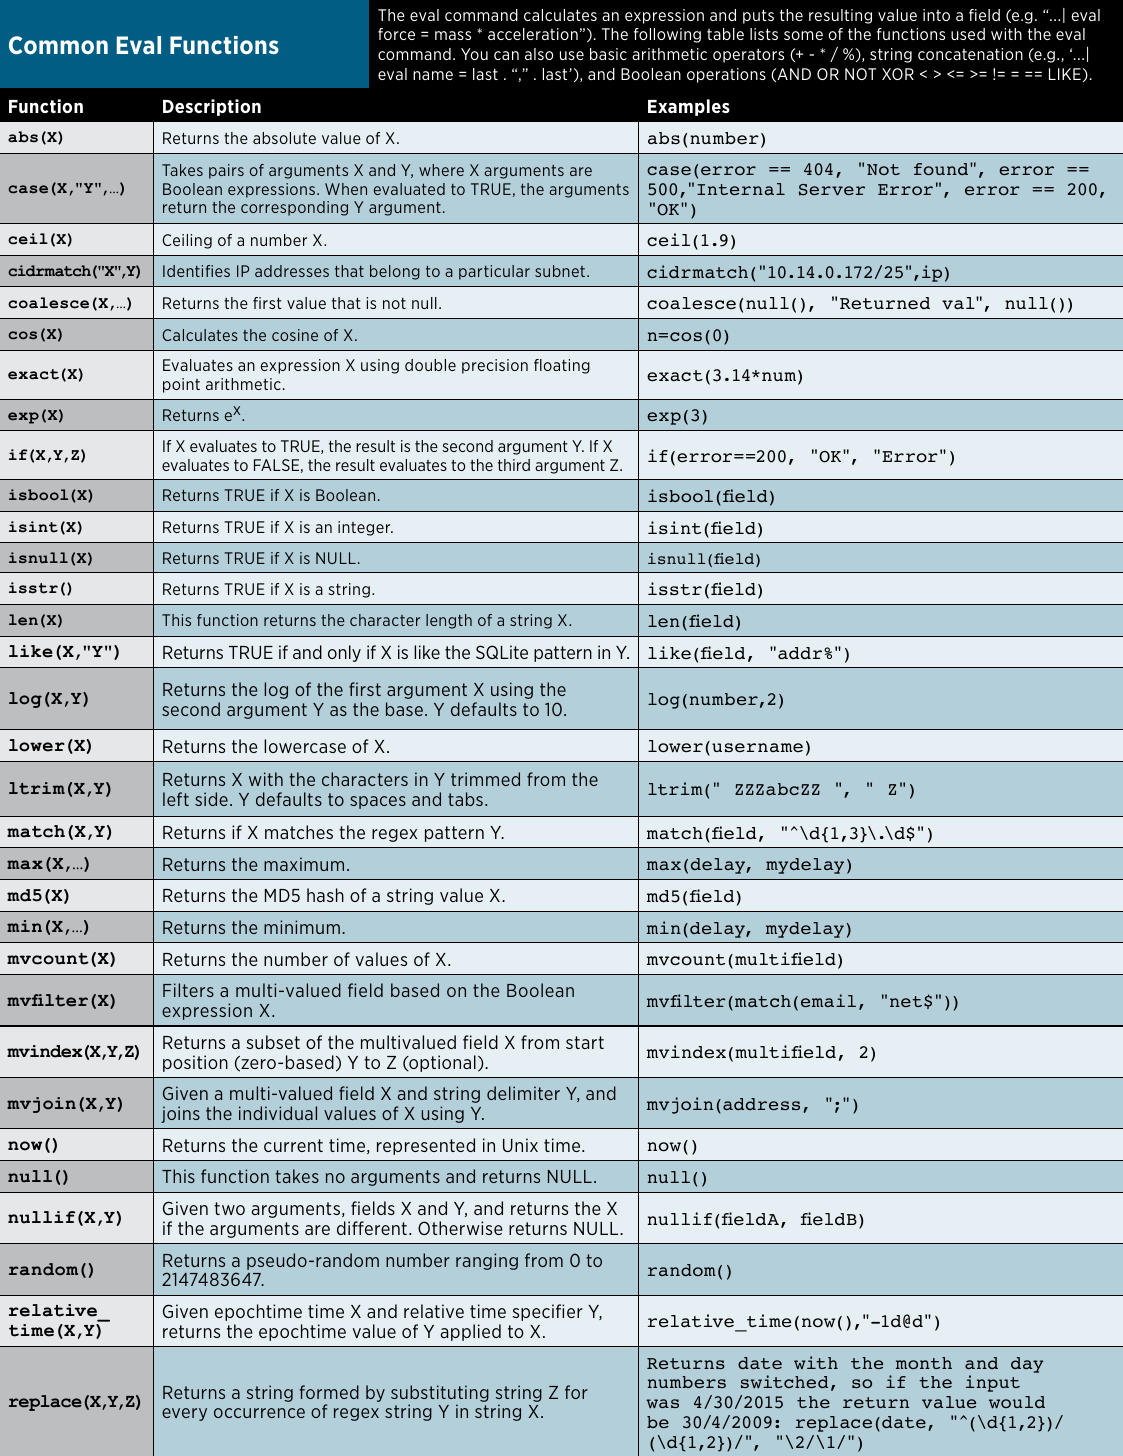 Page 3 of 6 - Splunk Quick Reference Guide